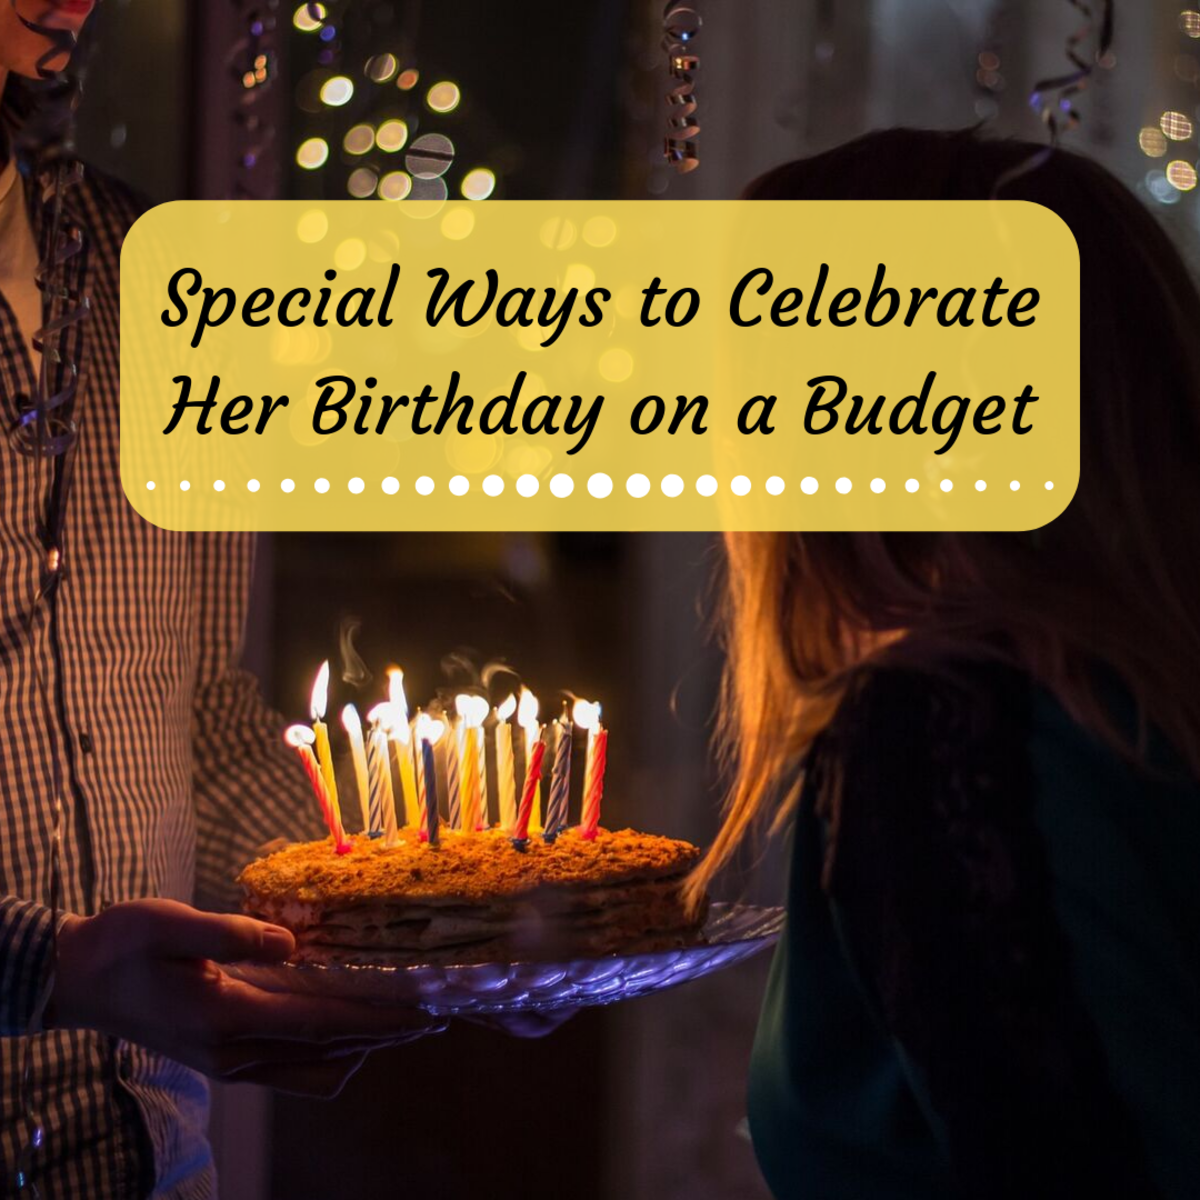 40th birthday ideas for wife on a budget